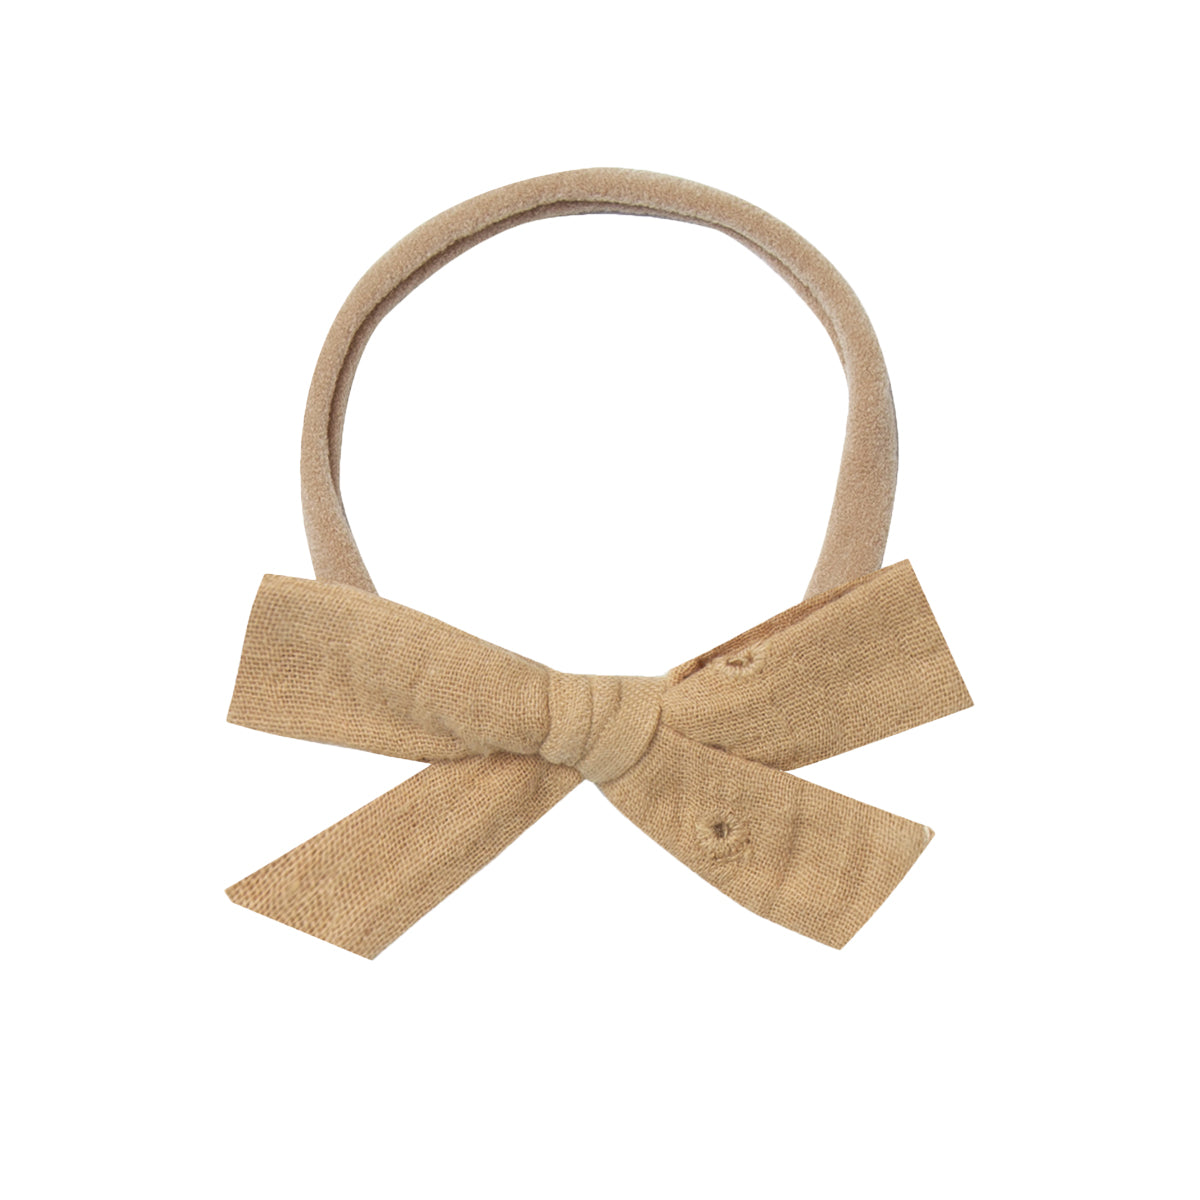 Rylee and Cru Baby Headband at Bonjour Baby Baskets